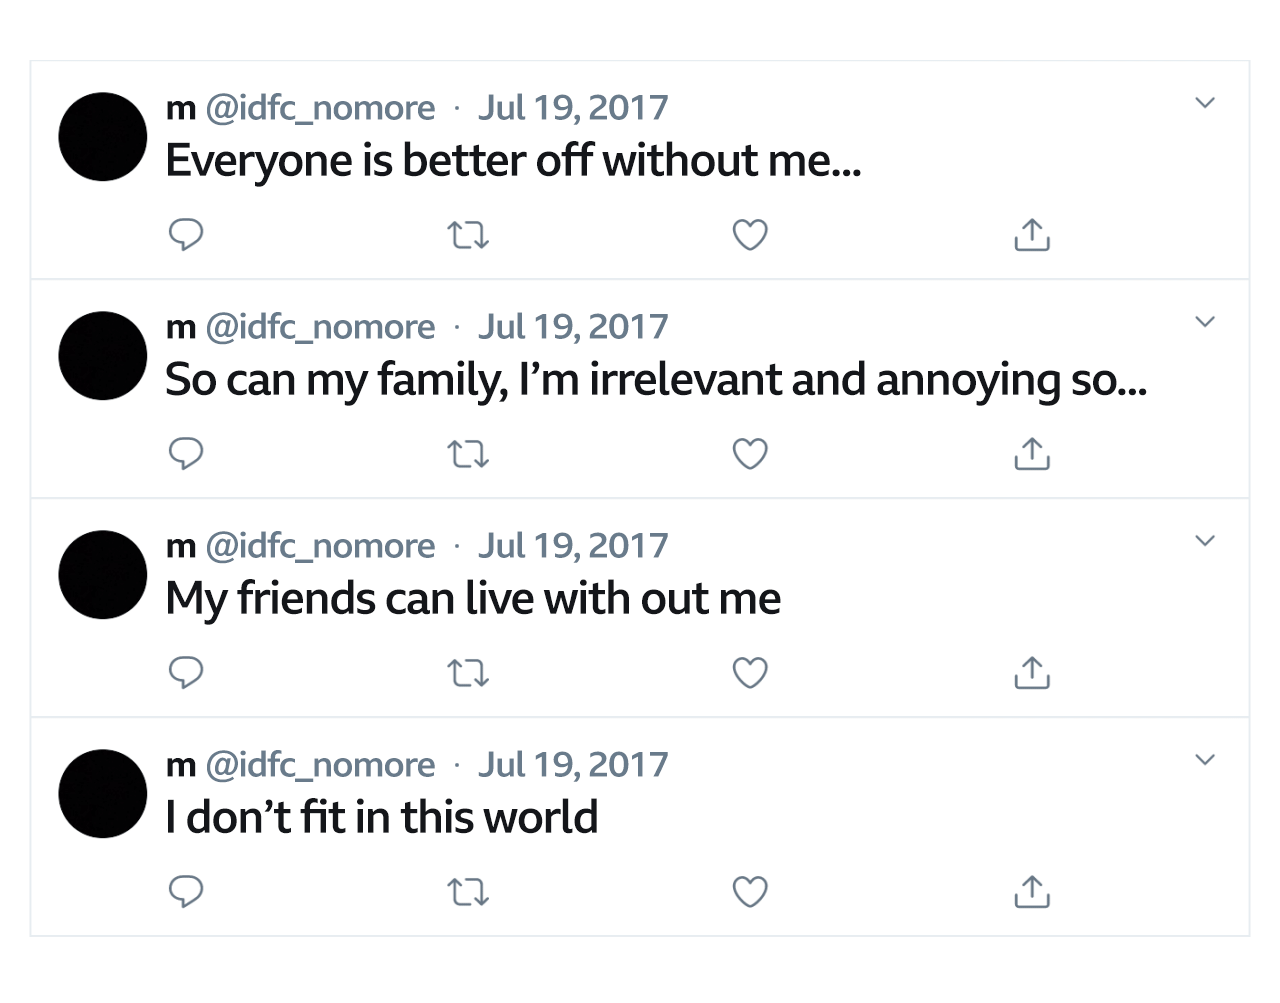 Tweets from Molly saying: 'Everyone is better off without me,' 'So can my family, I'm irrelevant and annoying so...' 'My friends can live without me,' 'I don't fit in this world'.